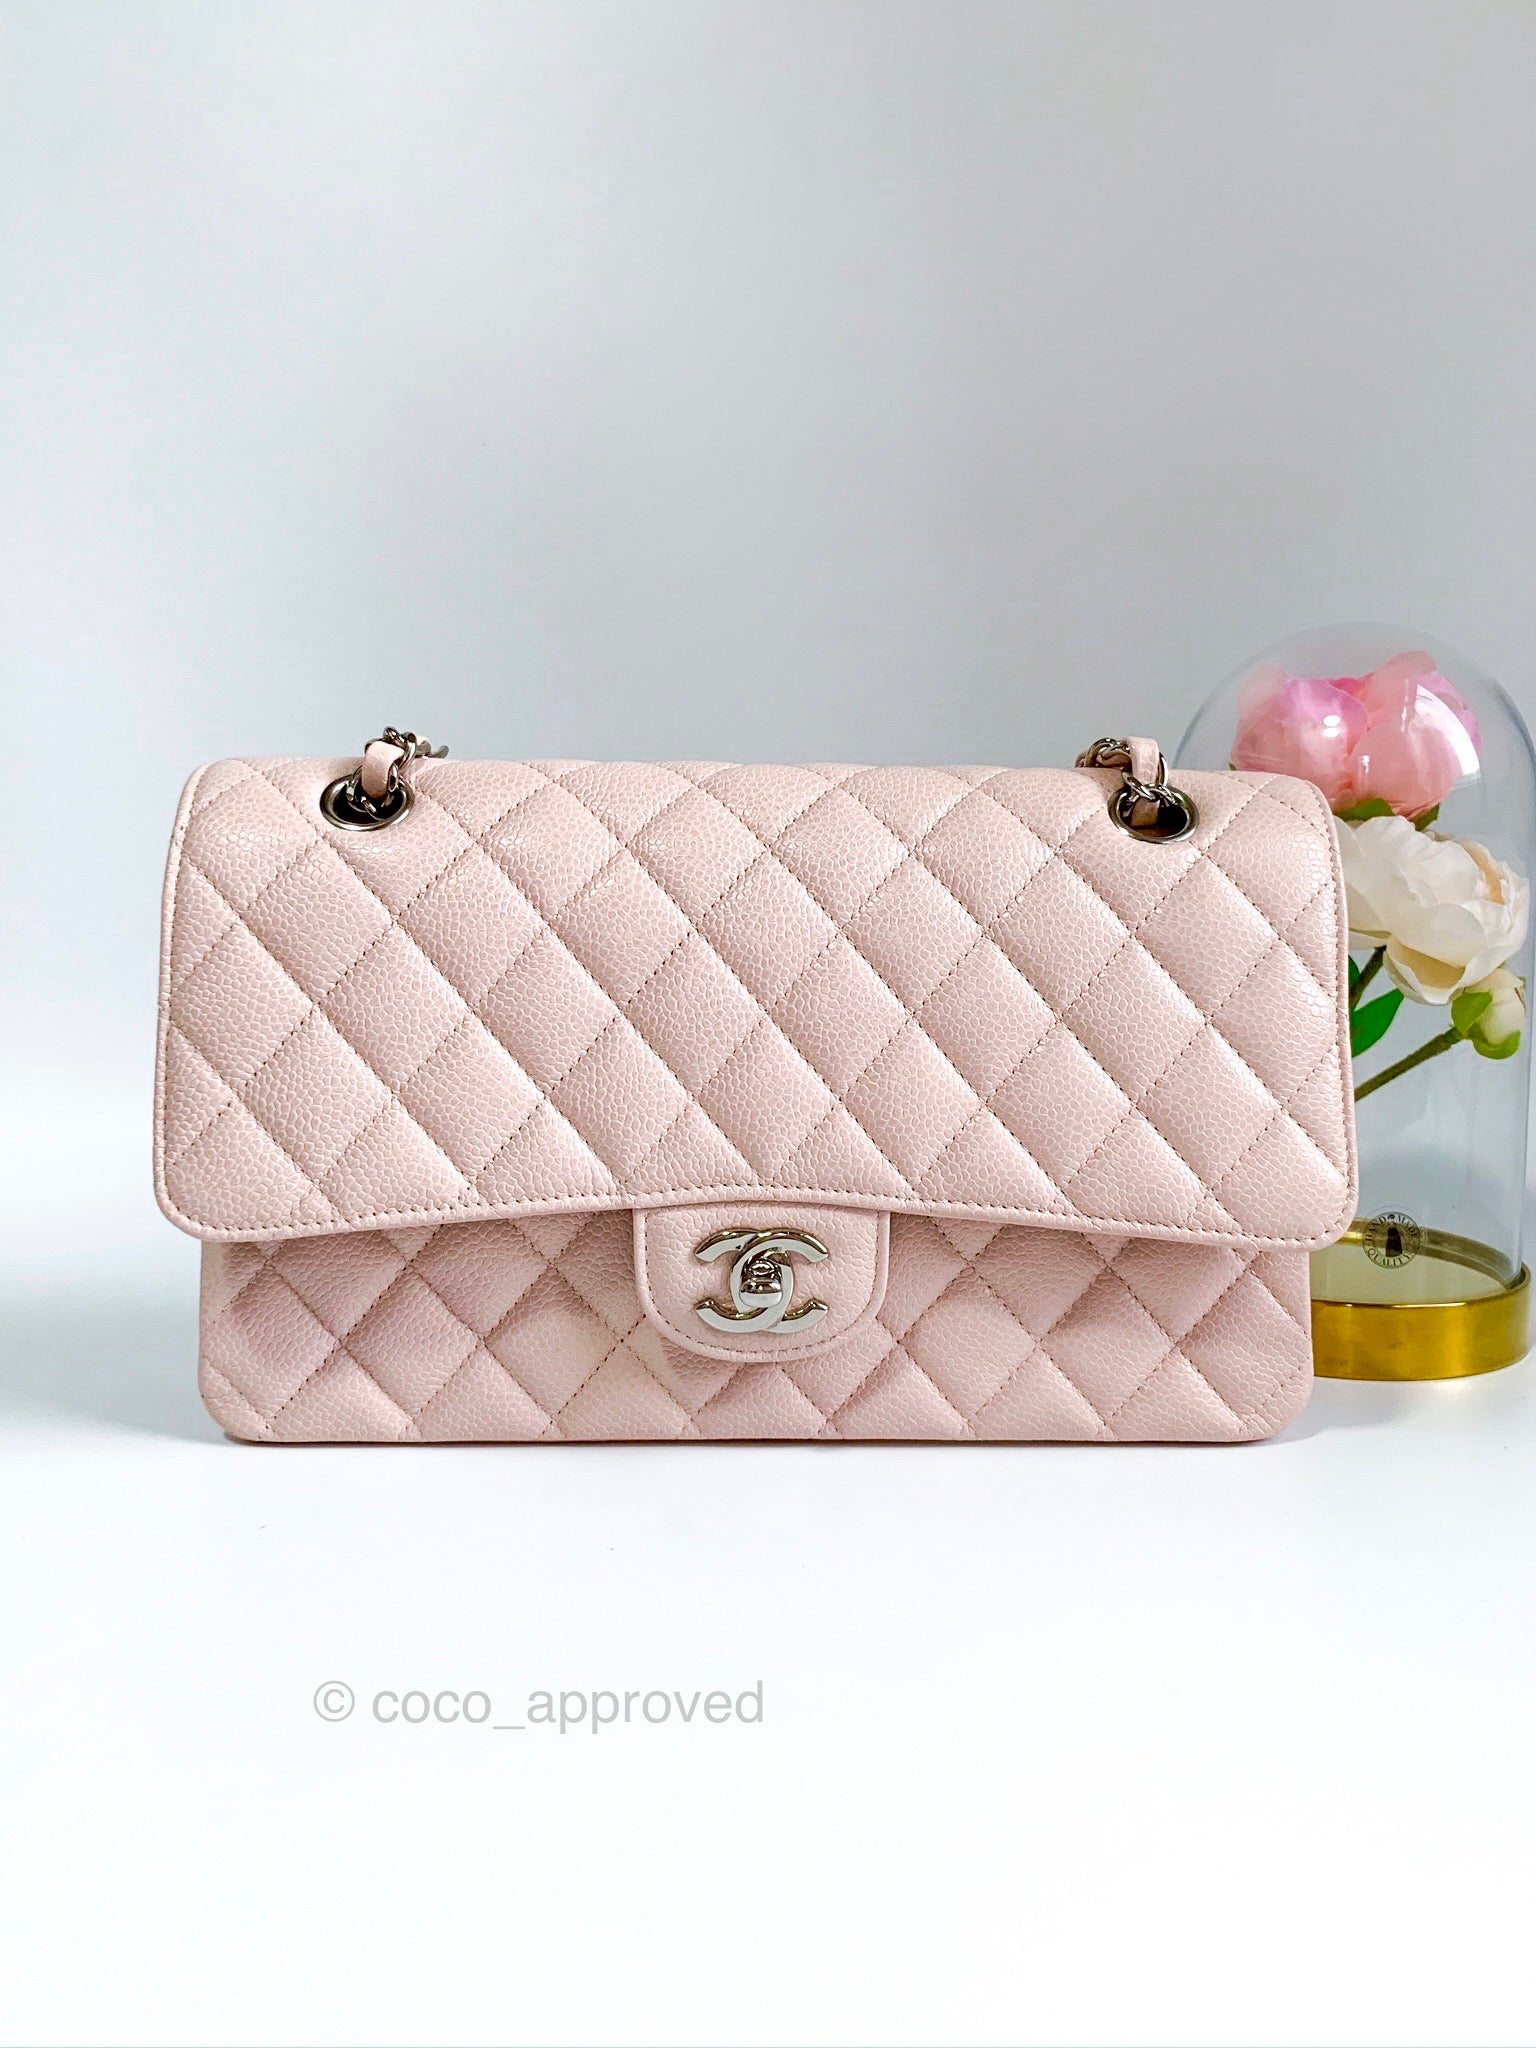 pink classic chanel